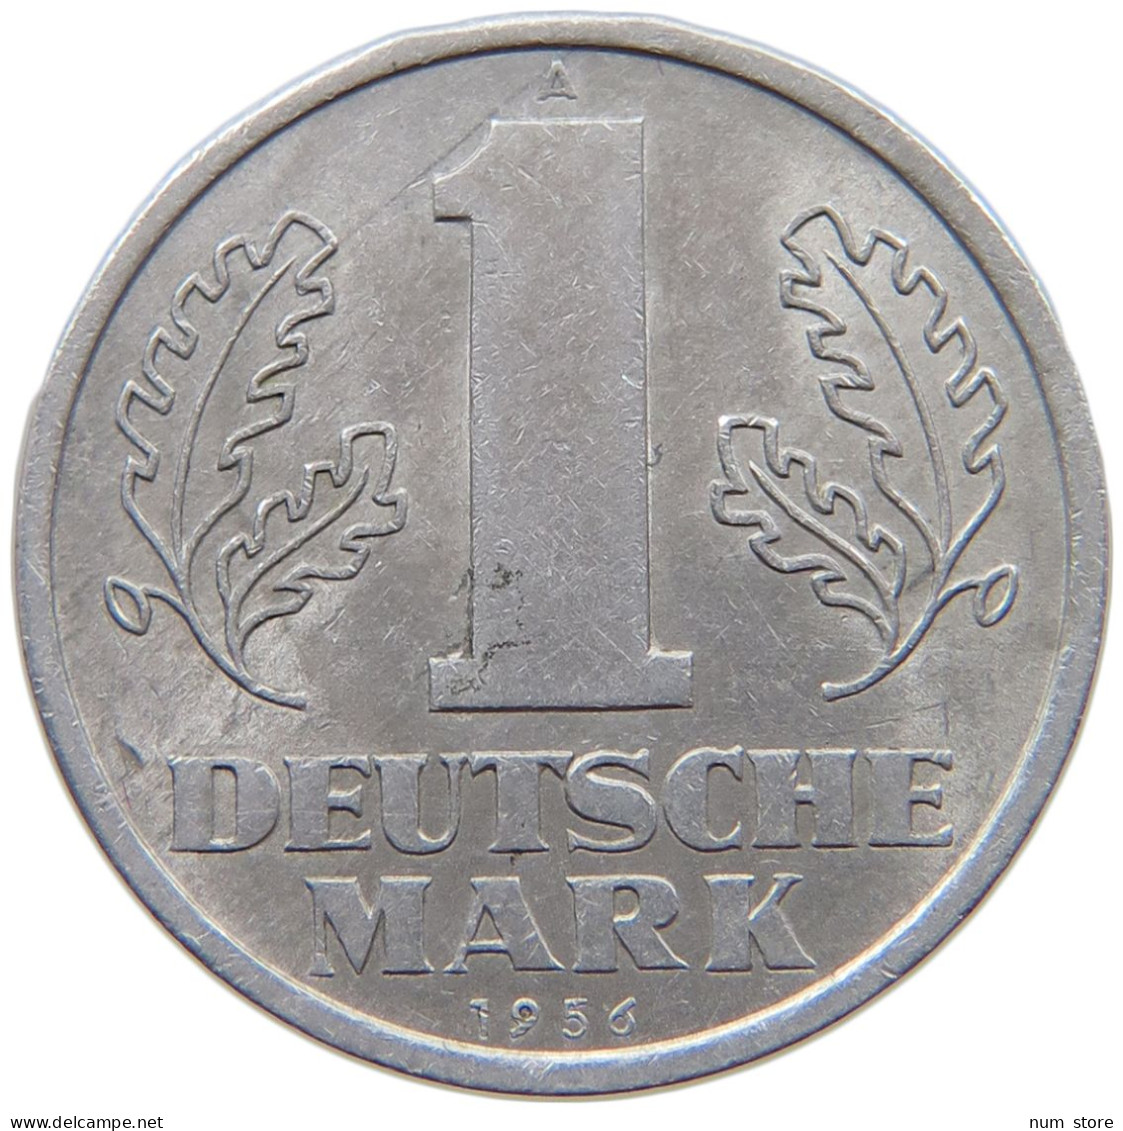 GERMANY DDR 1 MARK 1956 #a070 0605 - 1 Marco